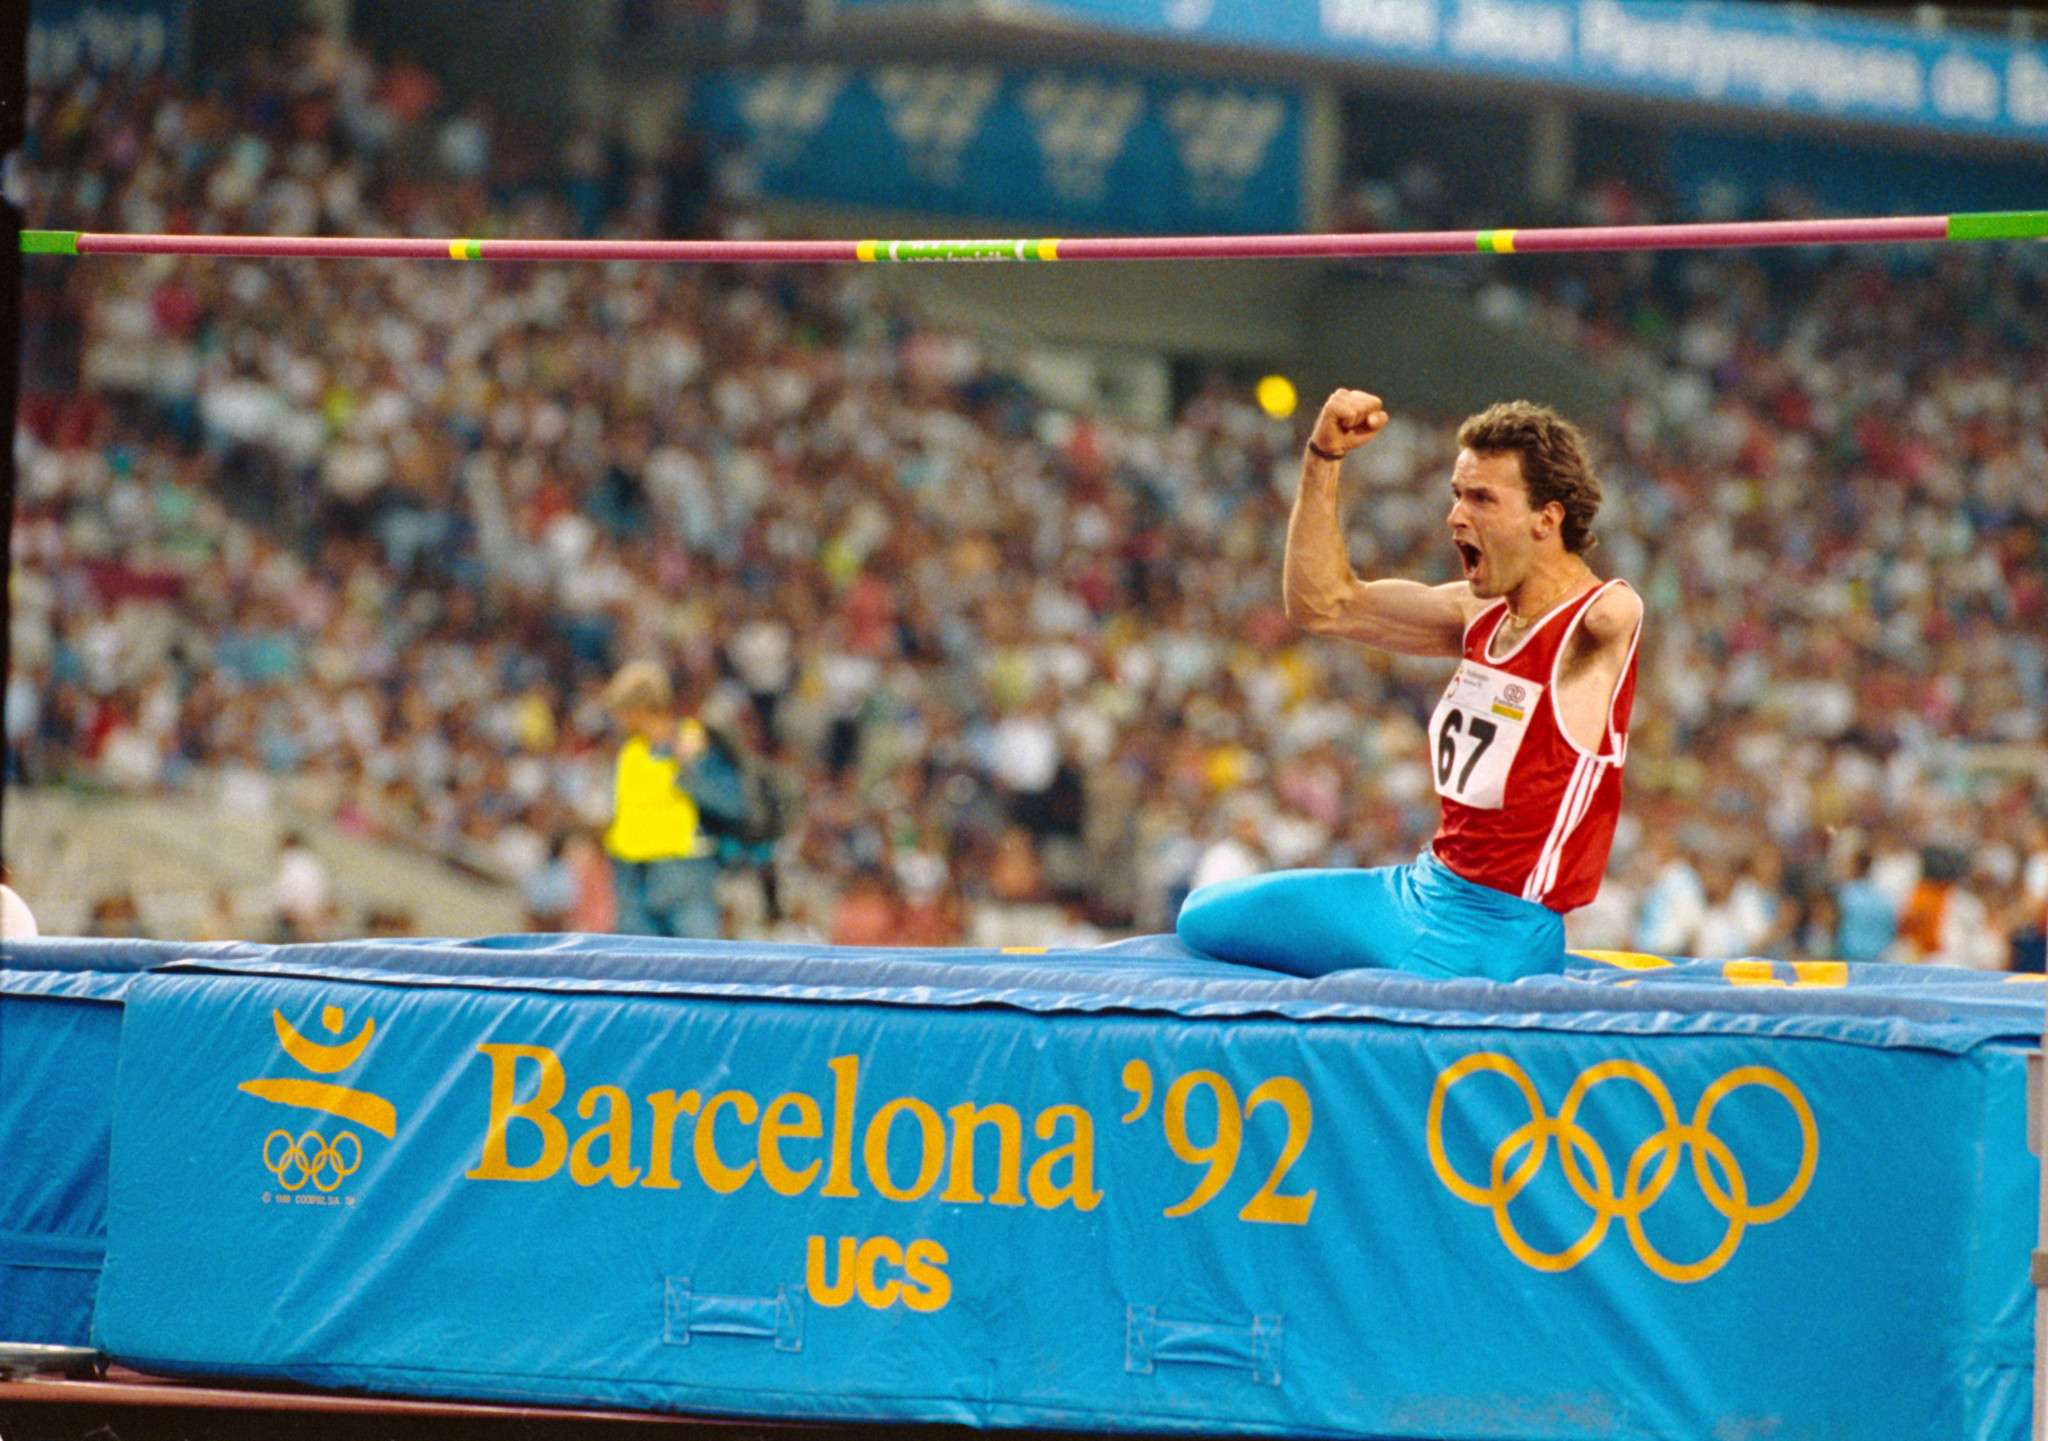 A new IPC/UN film showcases the societal impact of the 1992 Barcelona Paralympics ©Getty Images